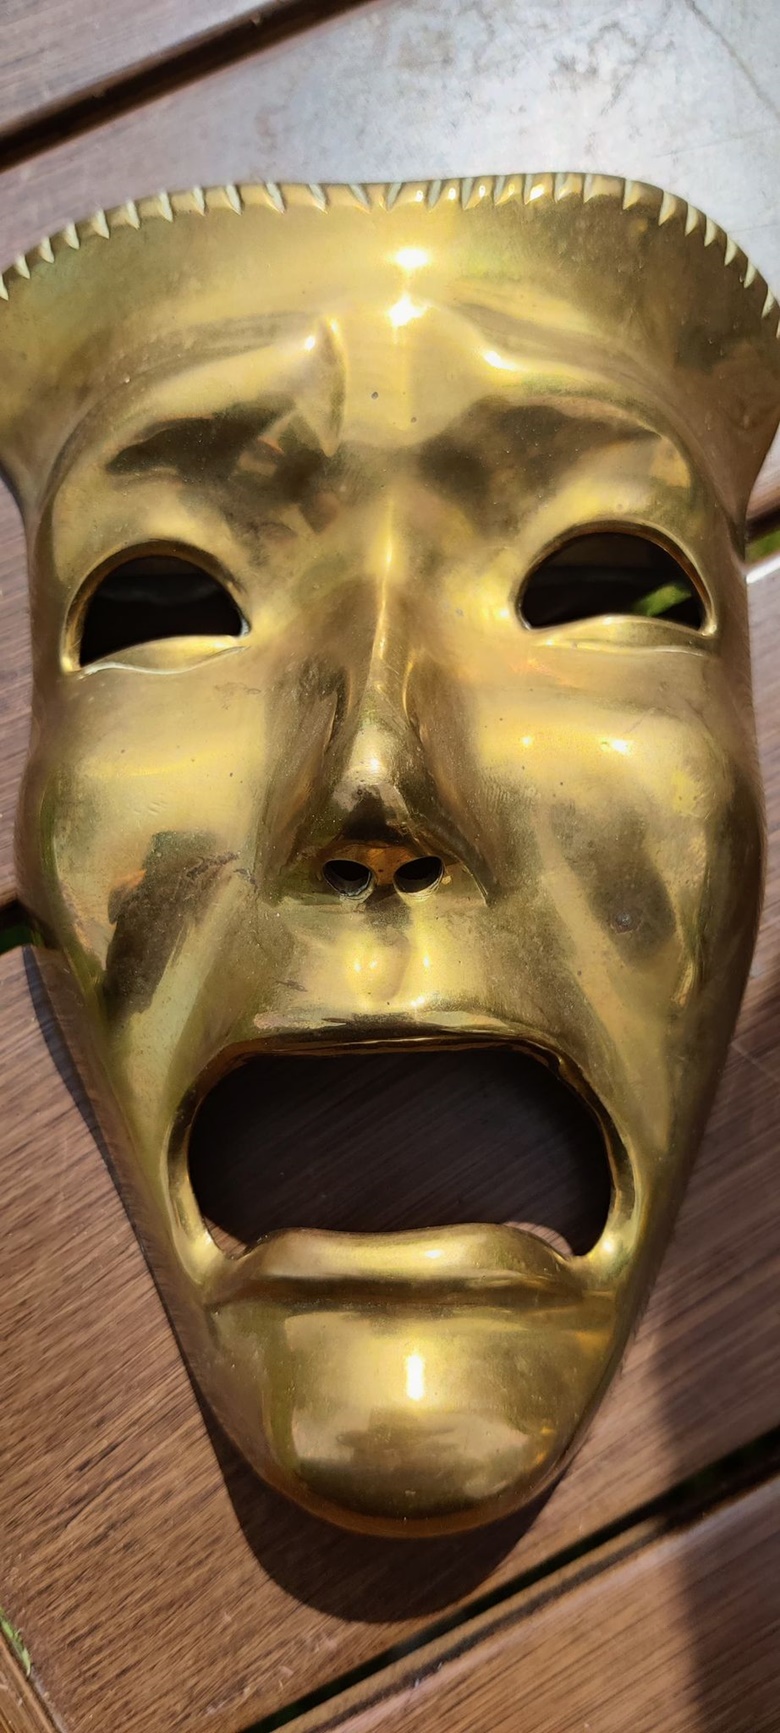 VINTAGE Solid Brass Face Mardi Gras Mask Wall Decor Handcrafted in India 